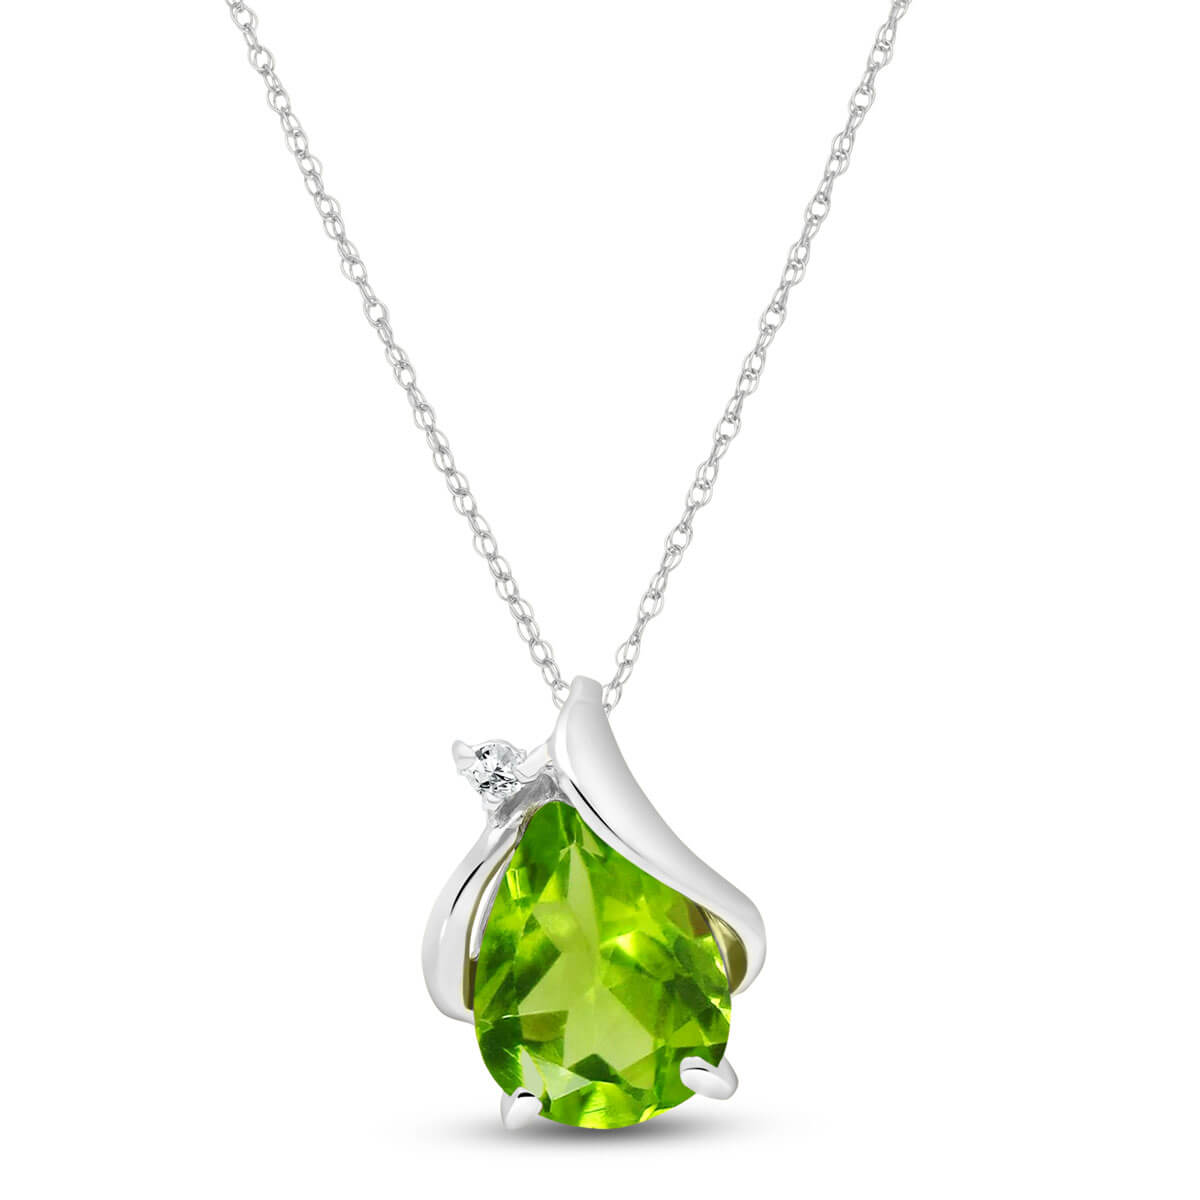 Pear Cut Peridot Pendant Necklace 2.13 ctw in 9ct White Gold